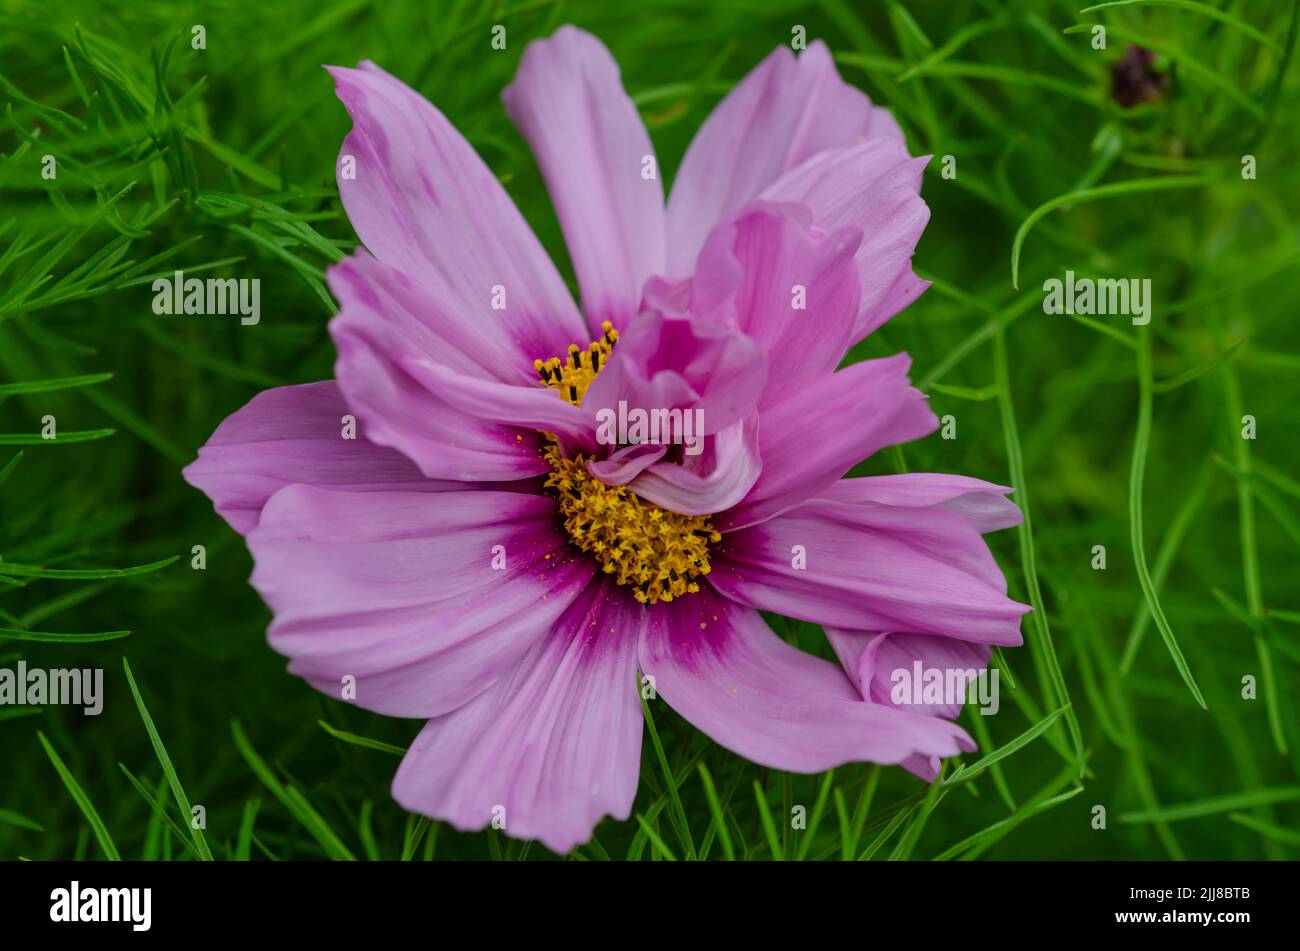 Rare fasciated cosmos flower, two flowers conjoined Stock Photo